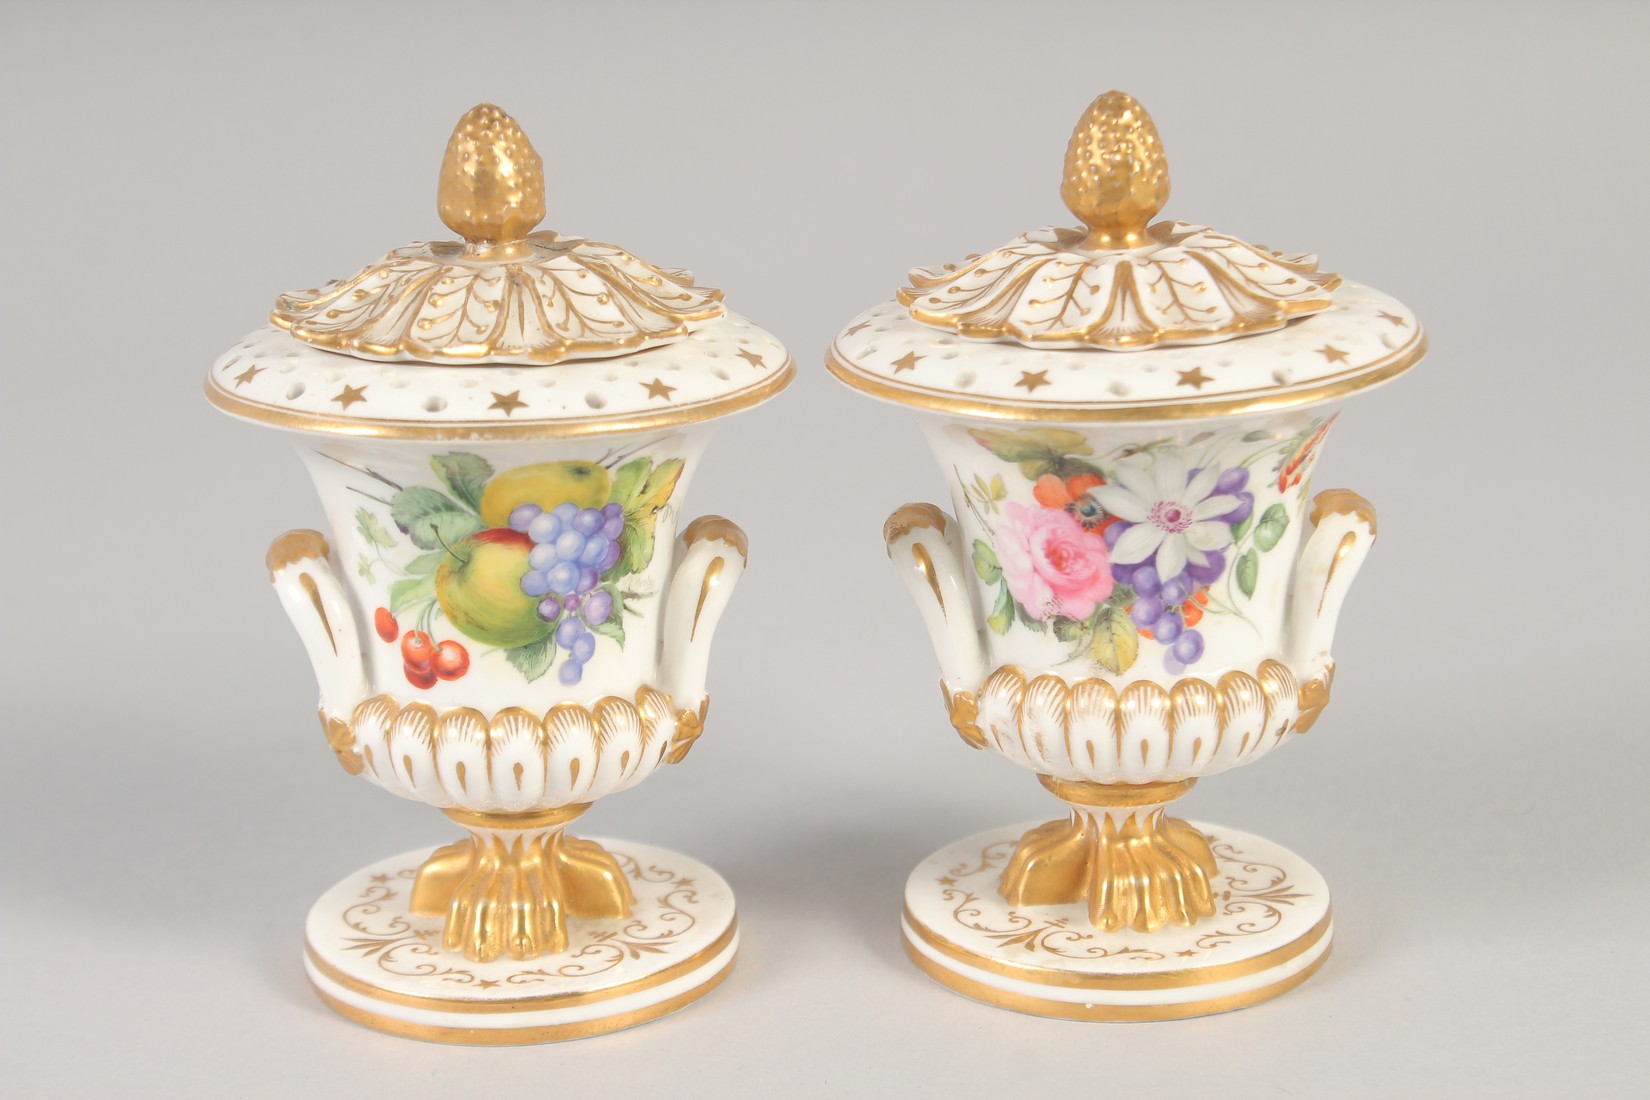 19TH CENTURY DERBY PAIR OF POTPOURRI VASES AND COVERS each side painted with either flowers or - Image 2 of 5